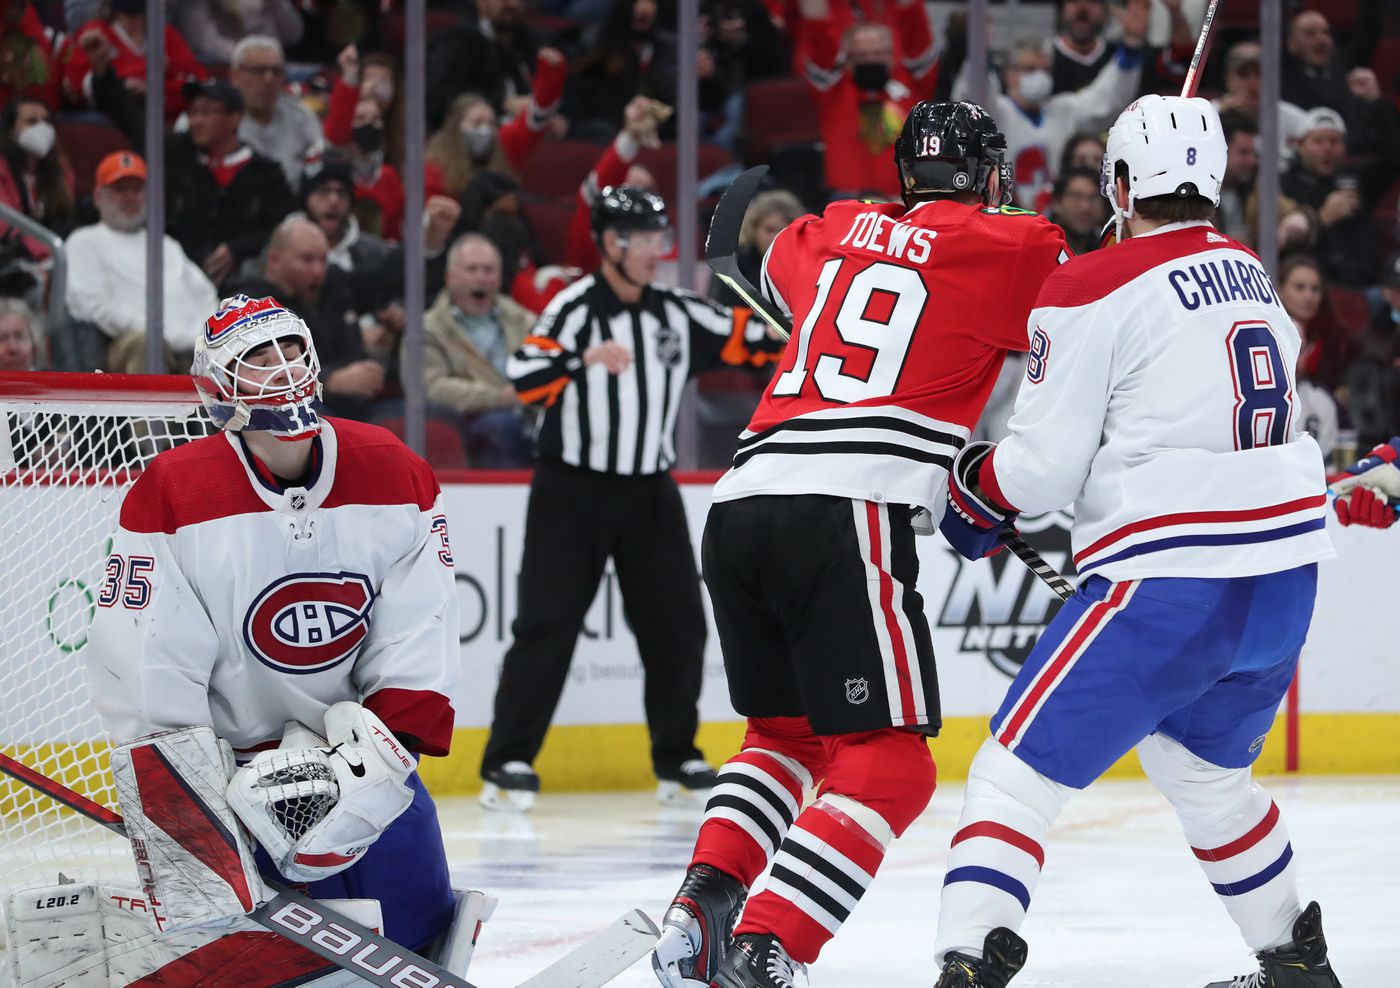 Montreal Canadiens goaltender Sam Montembeault (35) closes his eyes after Chicago Blackhawks right wing Patrick Kane (88) scores a goal in the third period at United Center on Jan. 13, 2022, in Chicago.